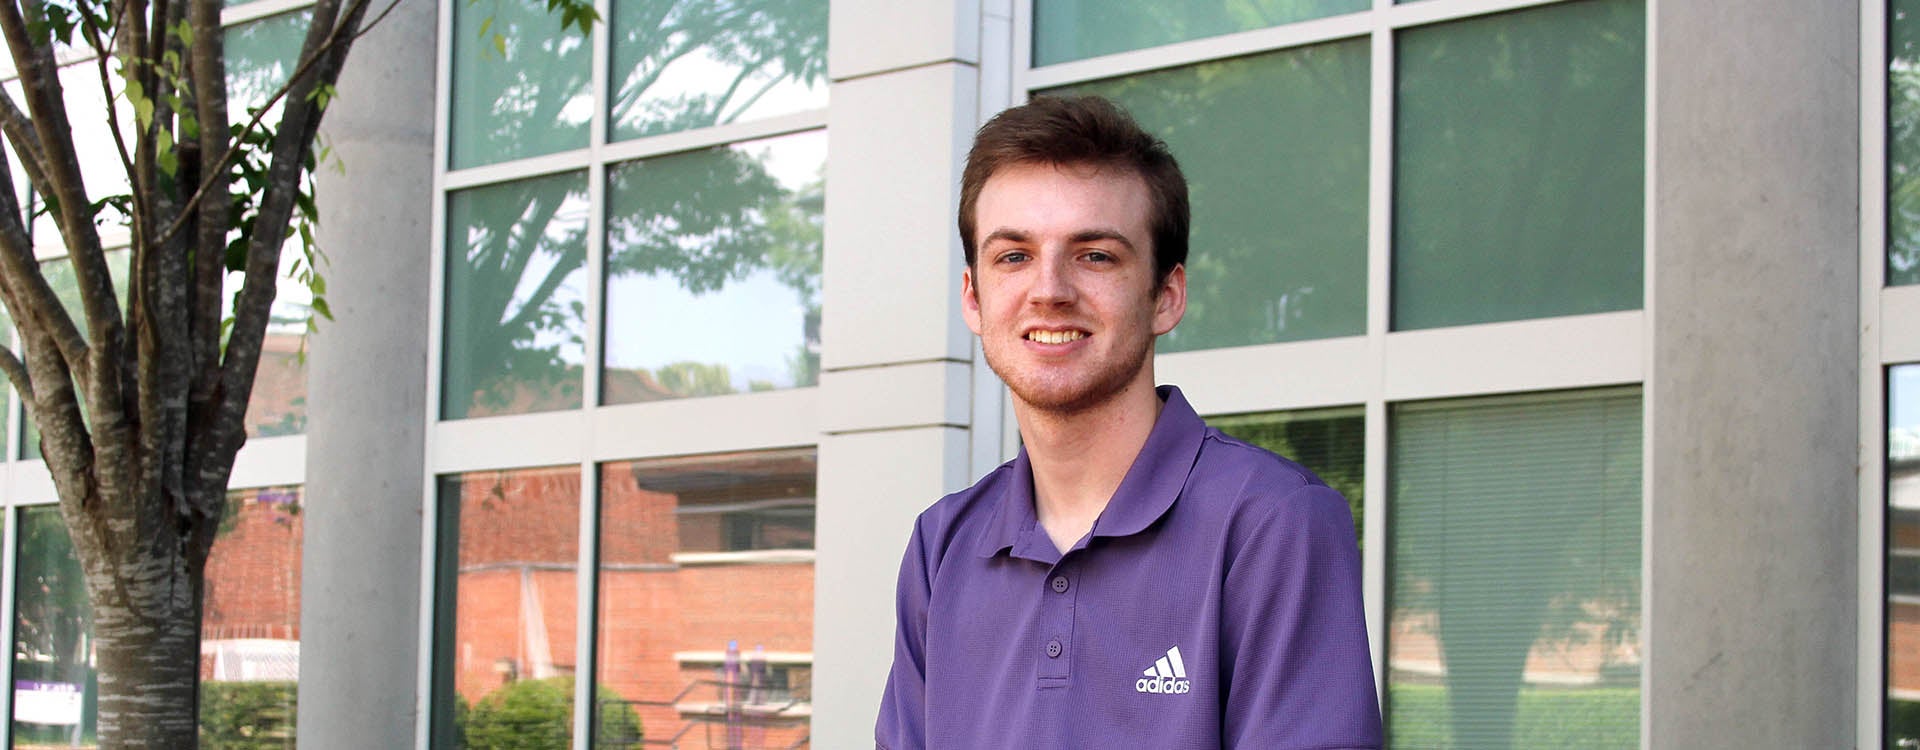 Jack Hanley is East Carolina University's first graduate in the Bachelor of Science in software engineering program. (Photo by Ken Buday)